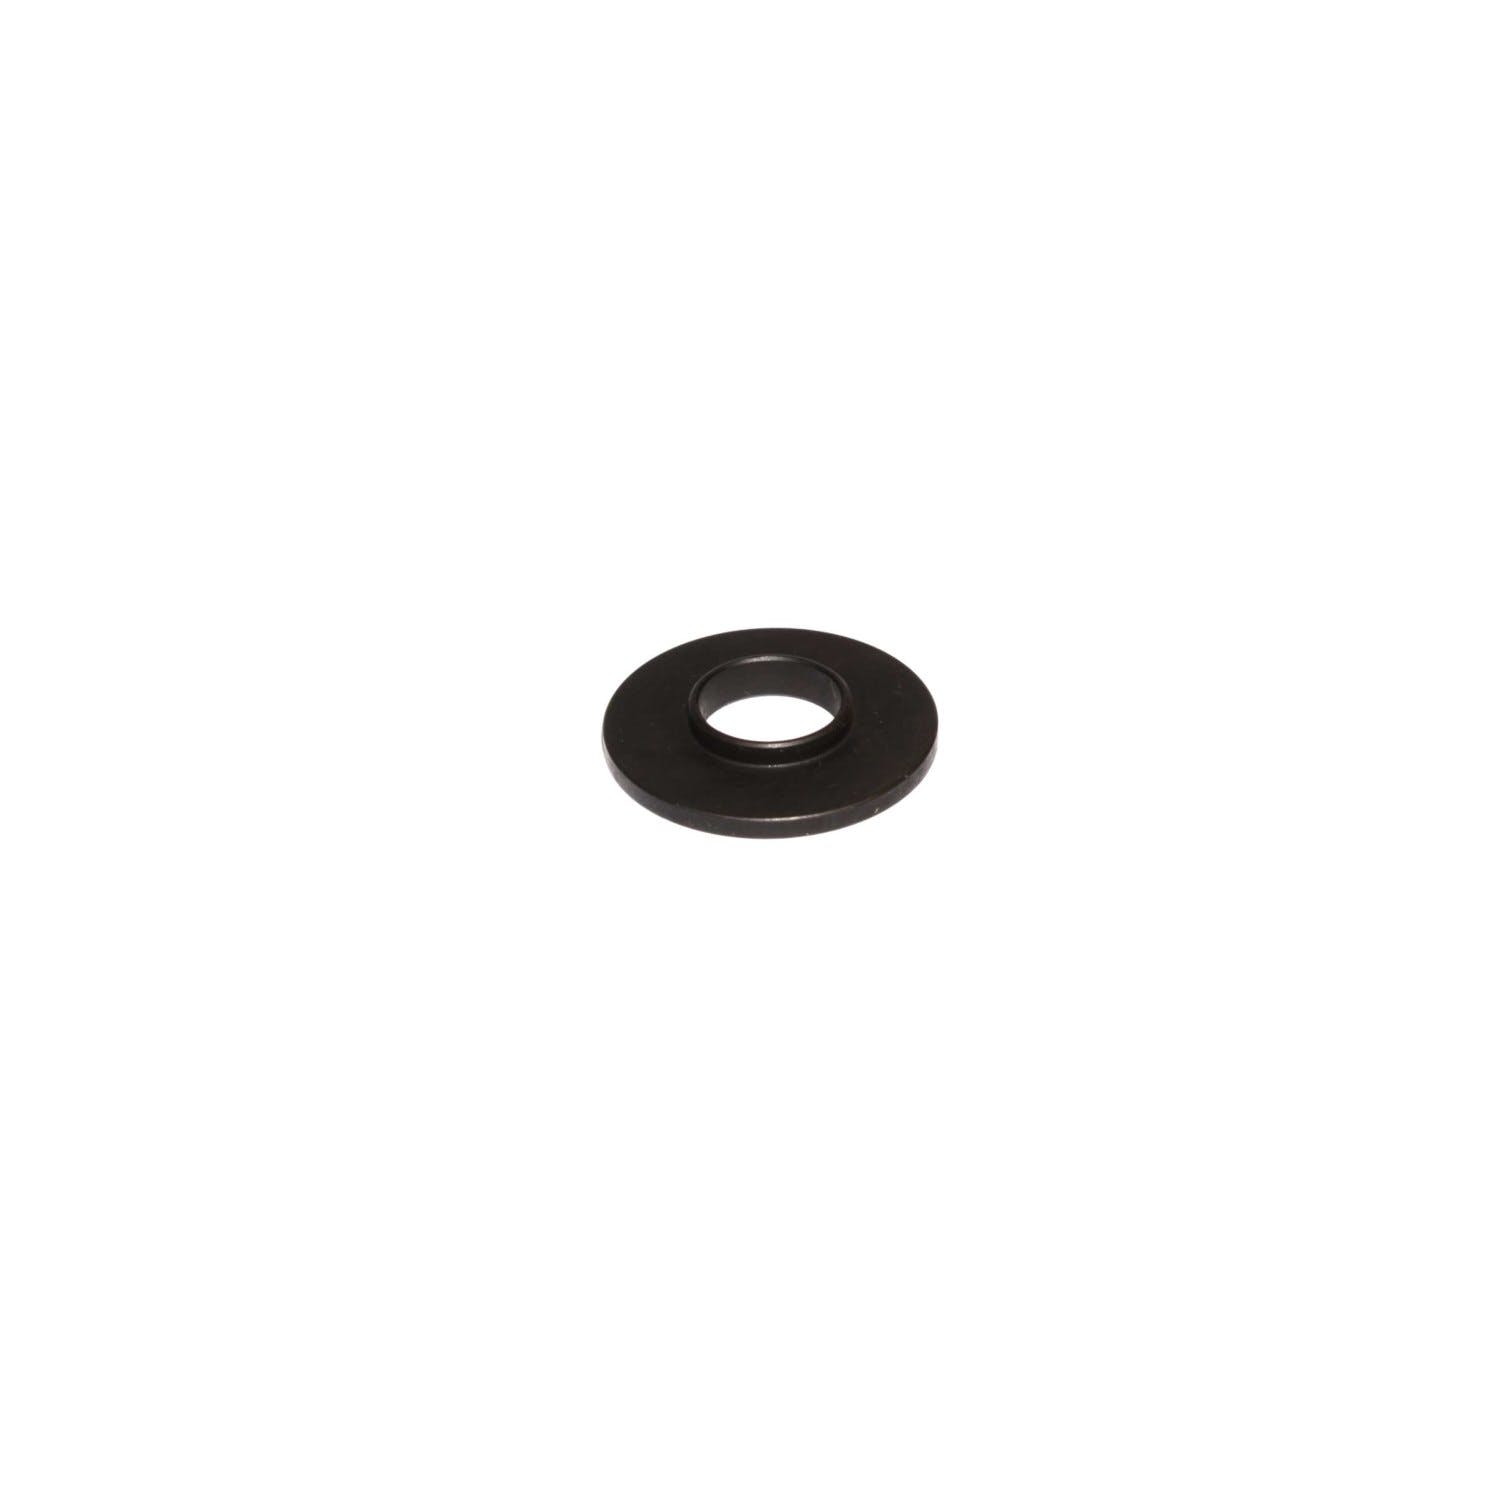 Competition Cams 4862-1 Valve Spring Locator